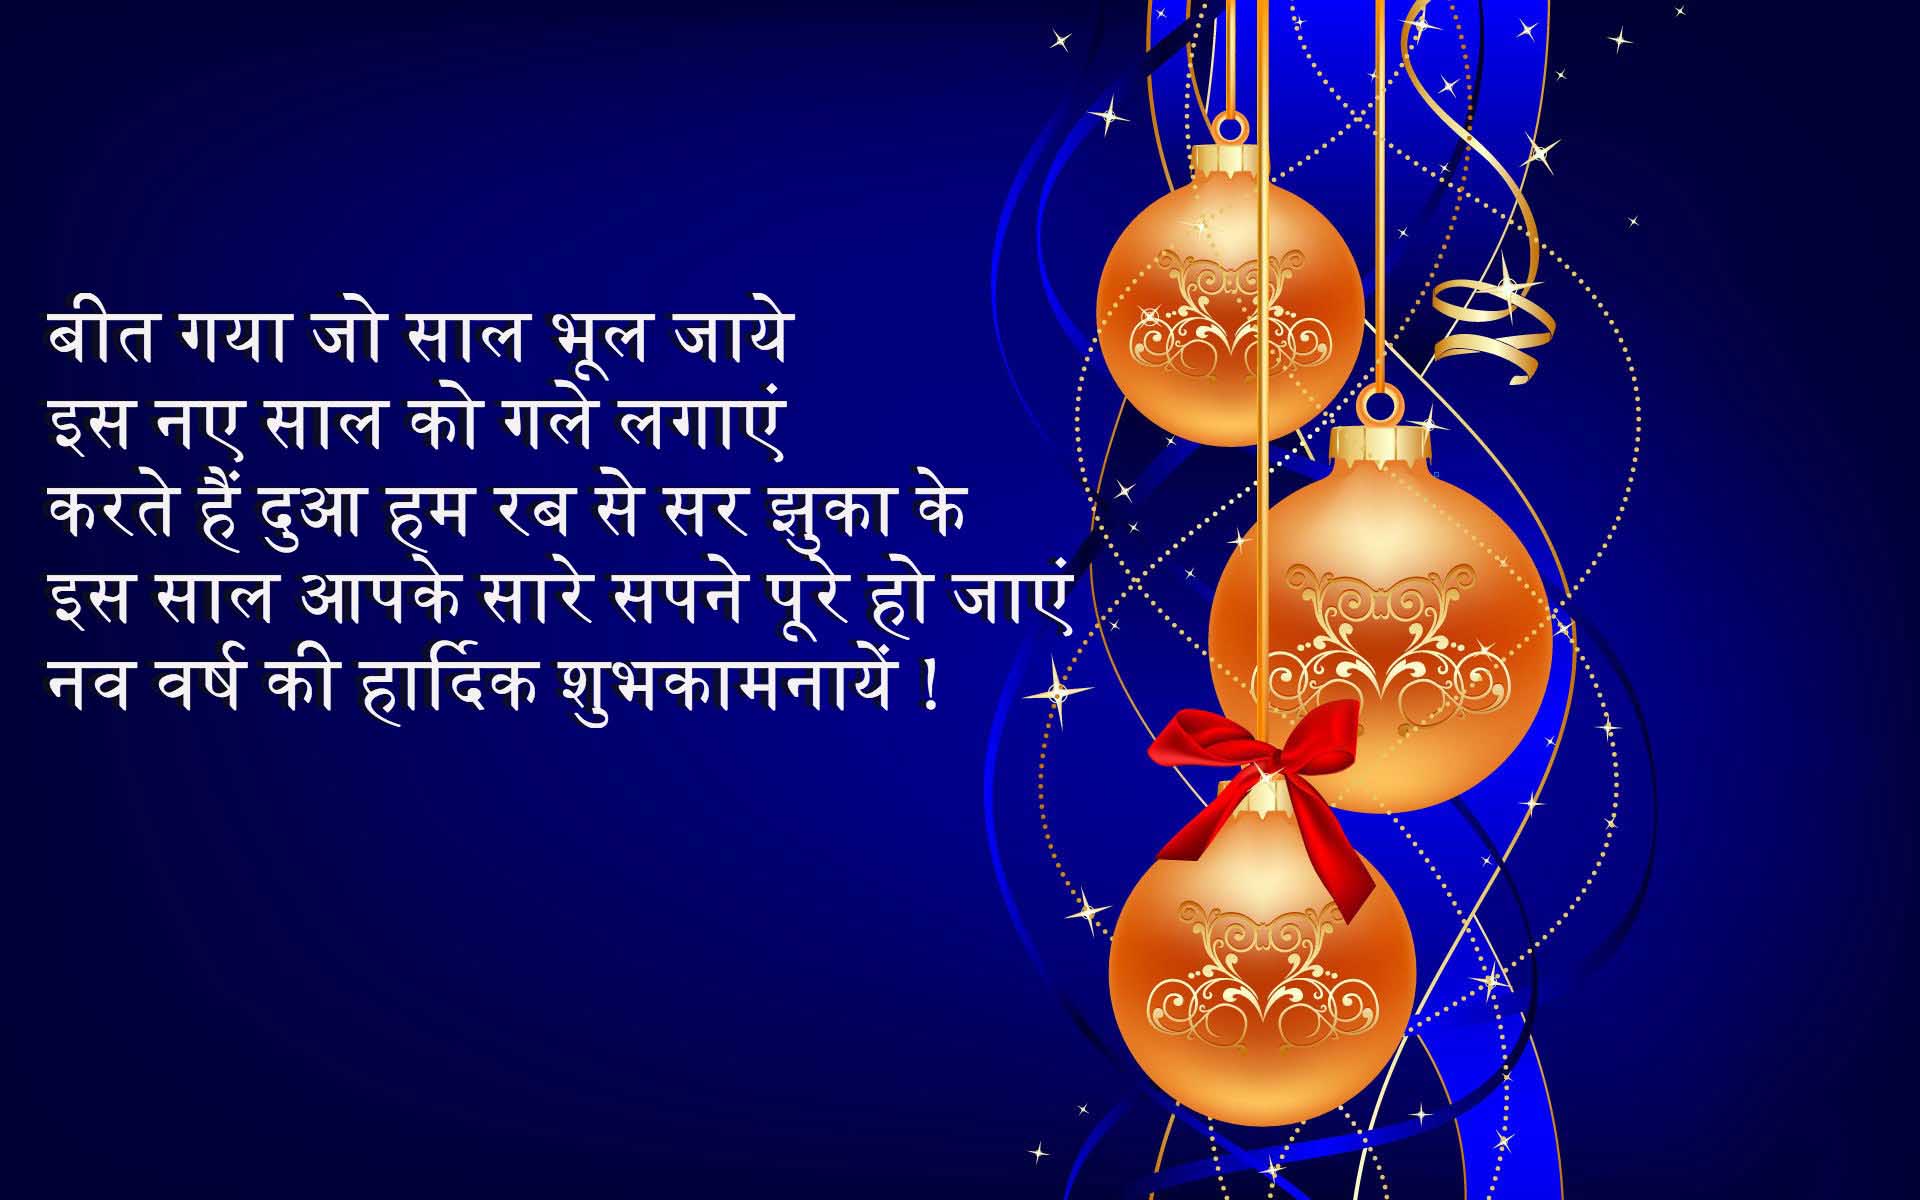 Happy New Year Wishes in Hindi | न्यू ईयर के बेहतरीन Quotes